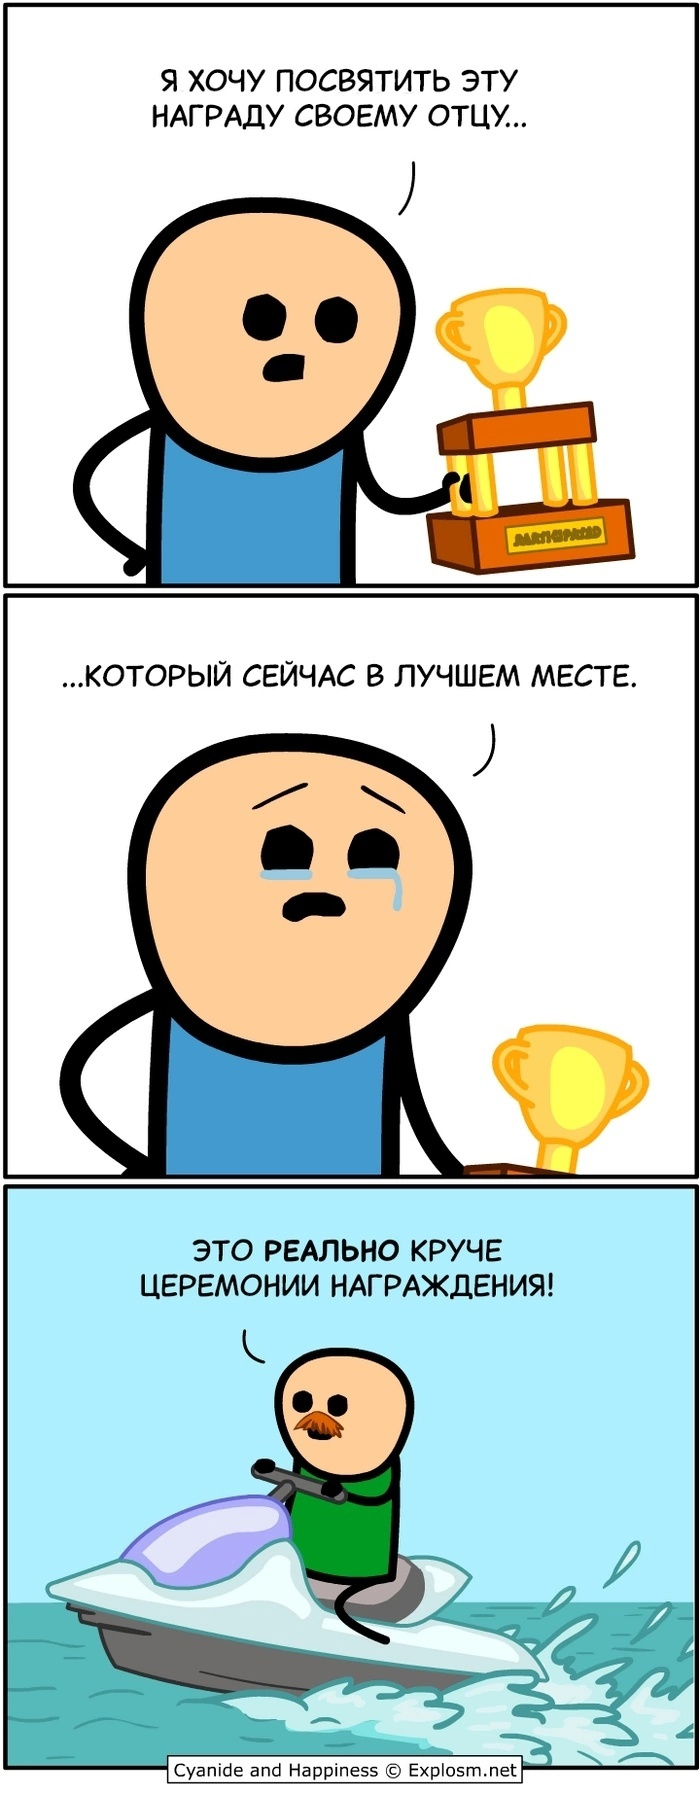      , , , Cyanide and Happiness, 